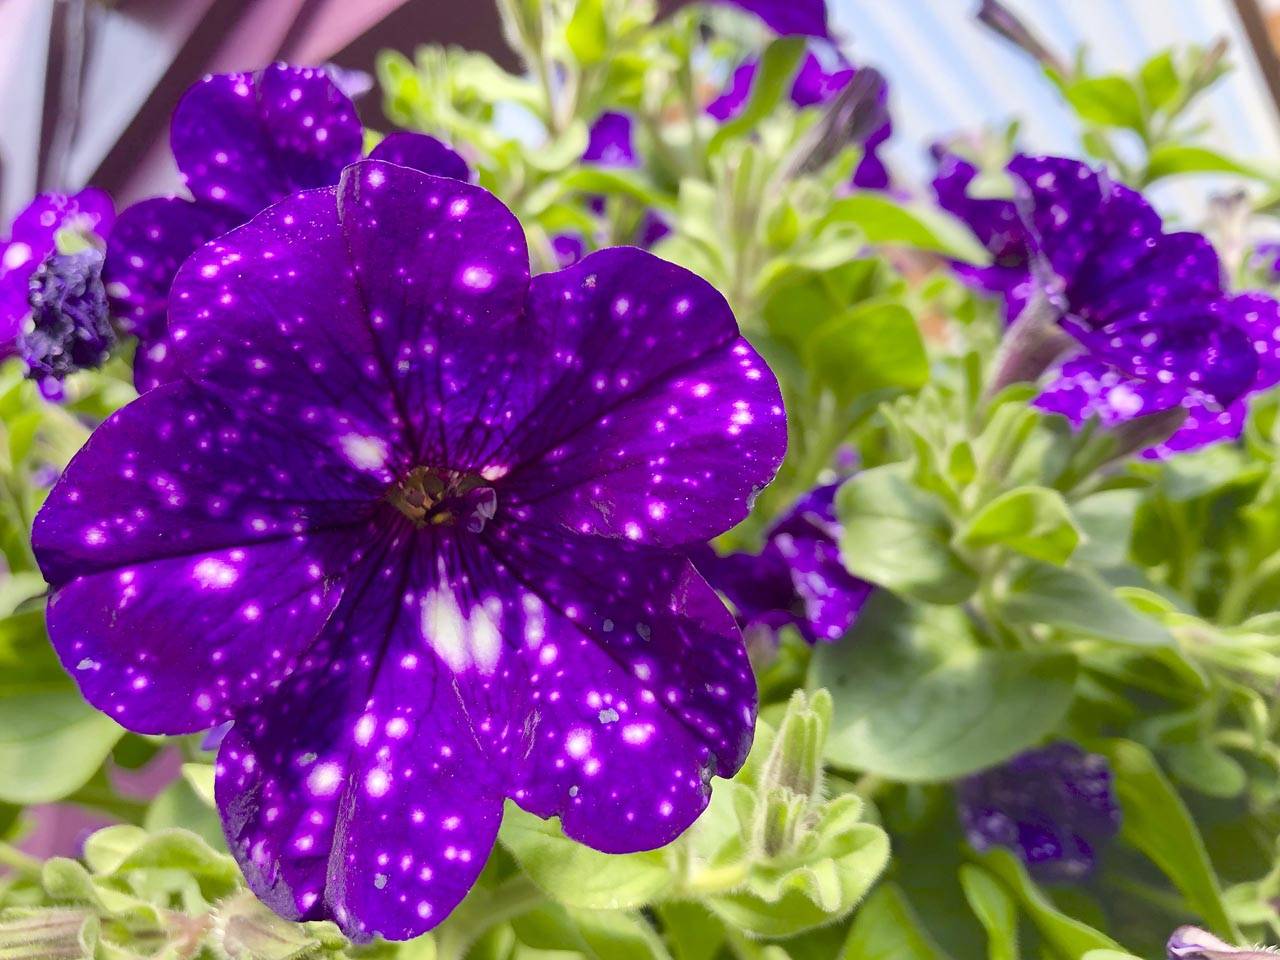 Flowers like this Night Sky petunia appreciate good growing conditions — which means adding compost and organic fertilizer. (Courtesy photo)